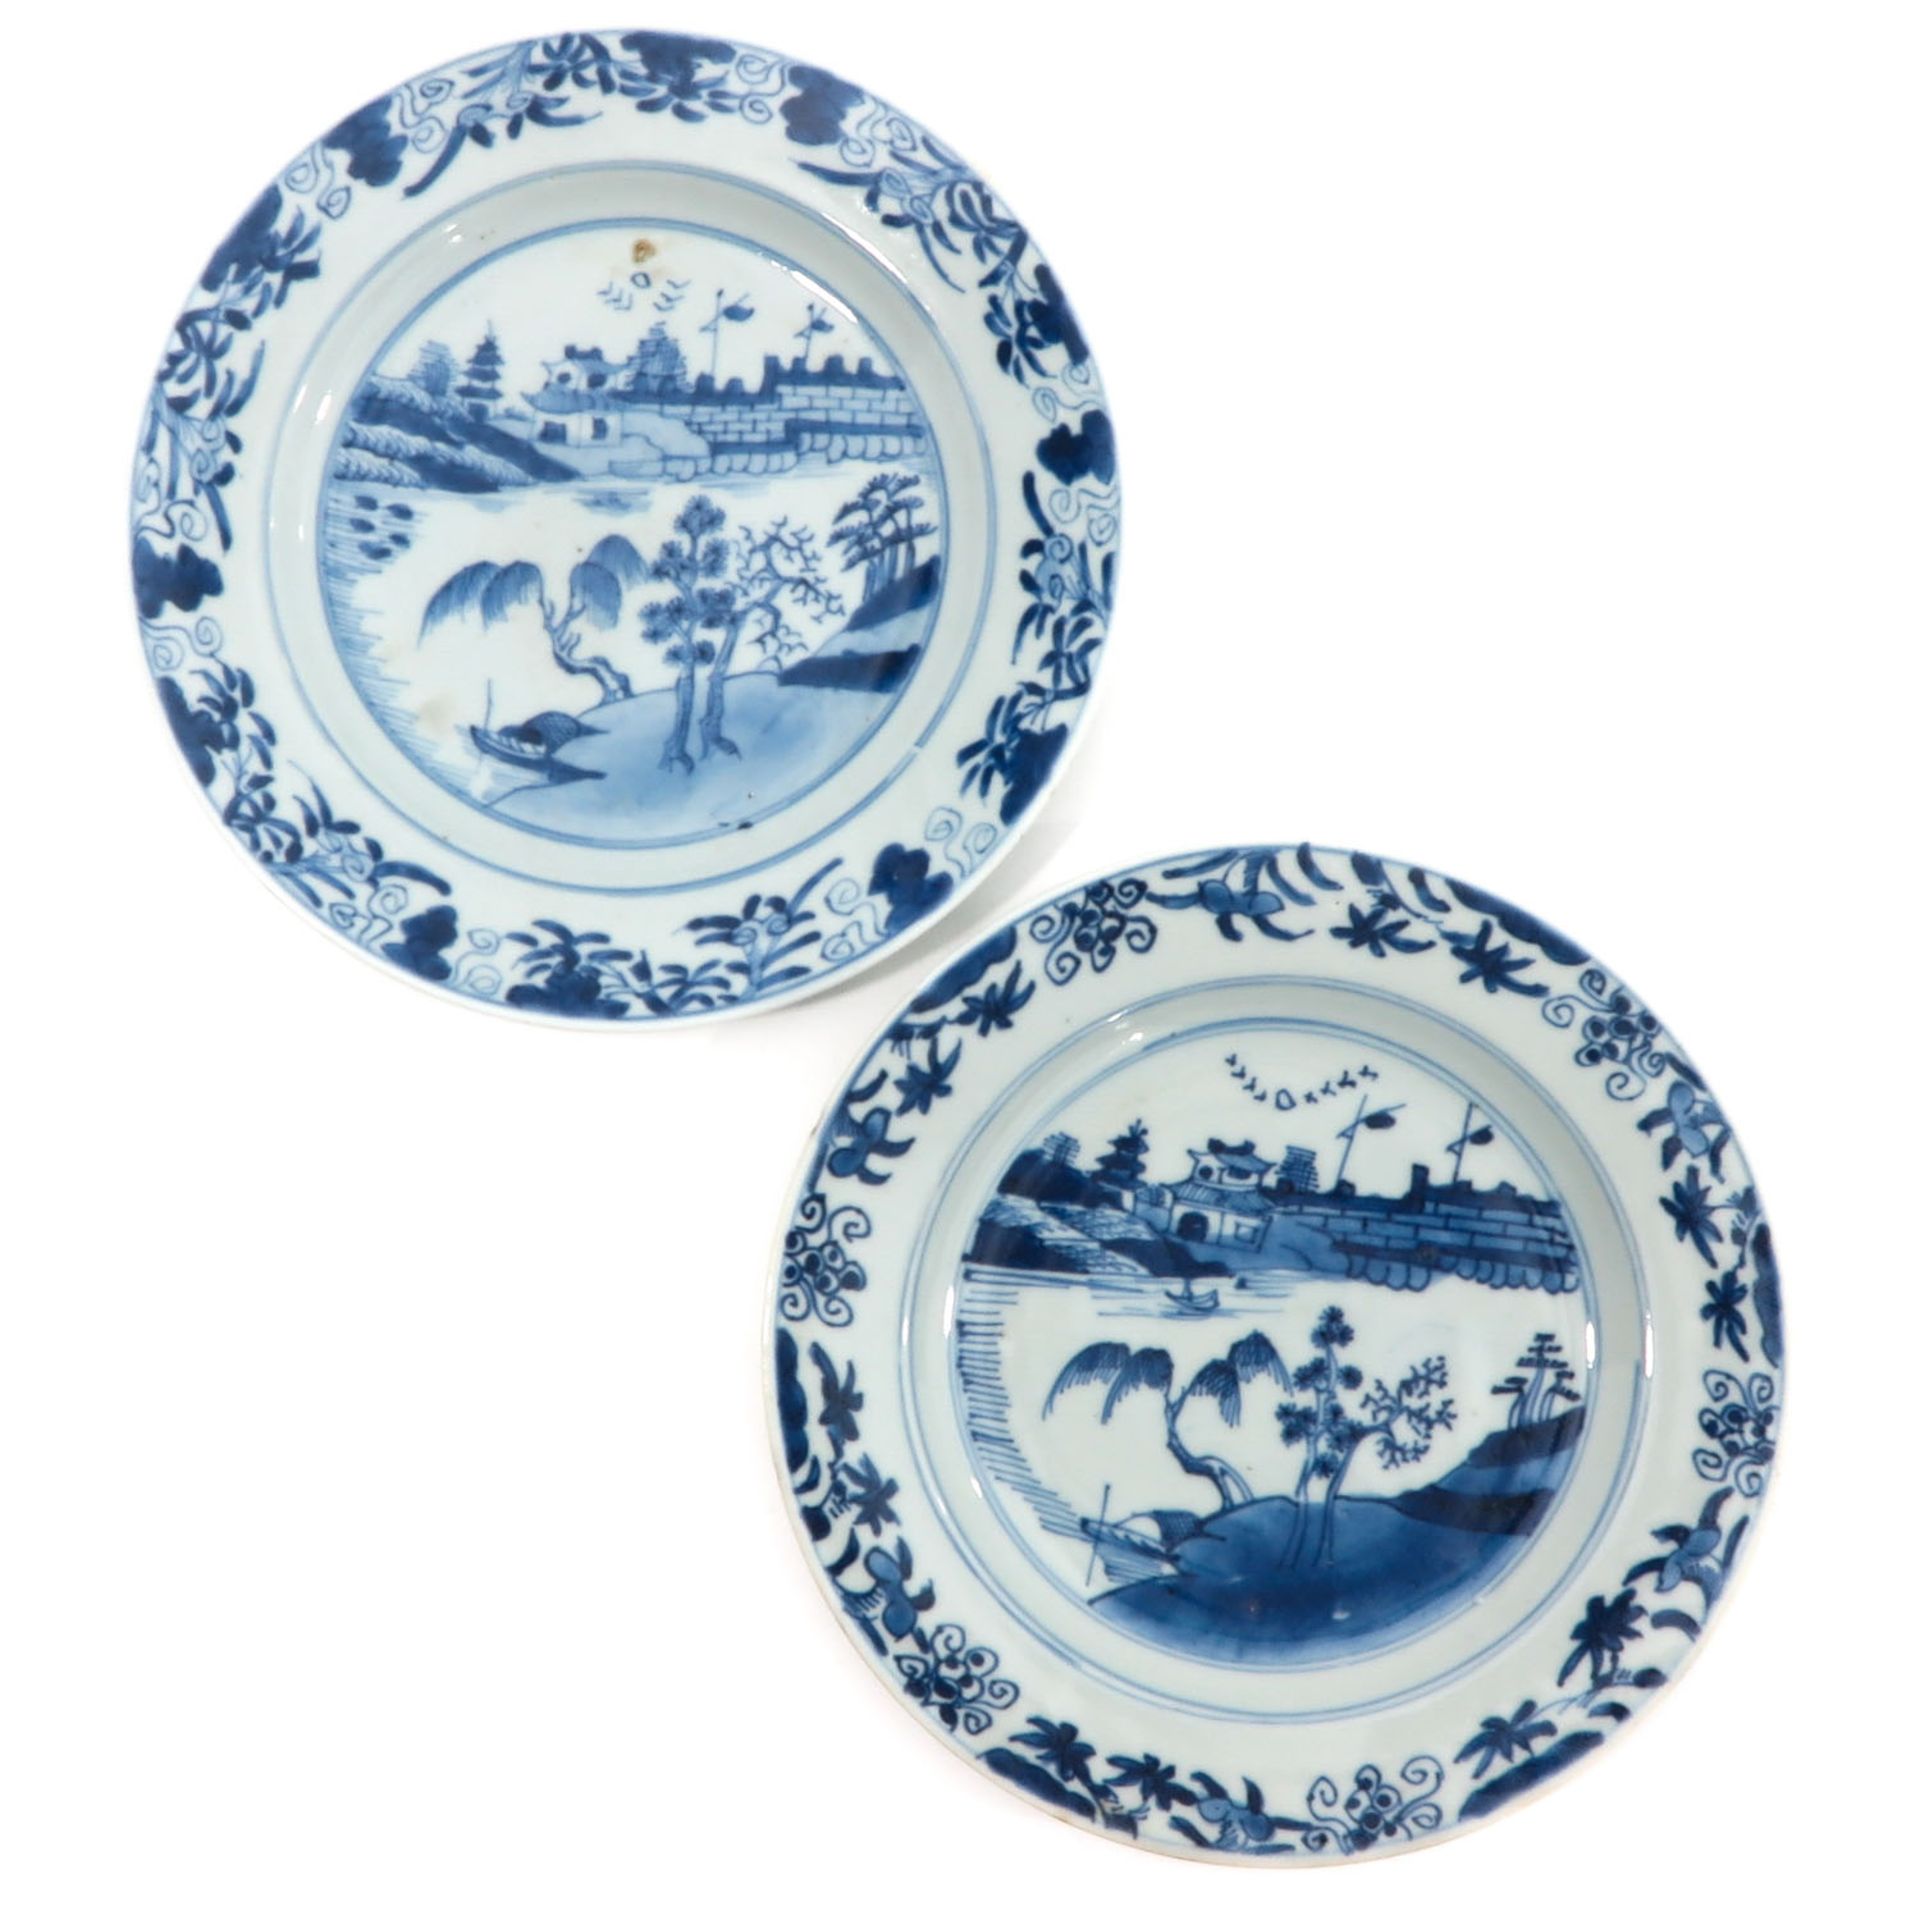 A Series of 4 Blue and White Plates - Image 3 of 9